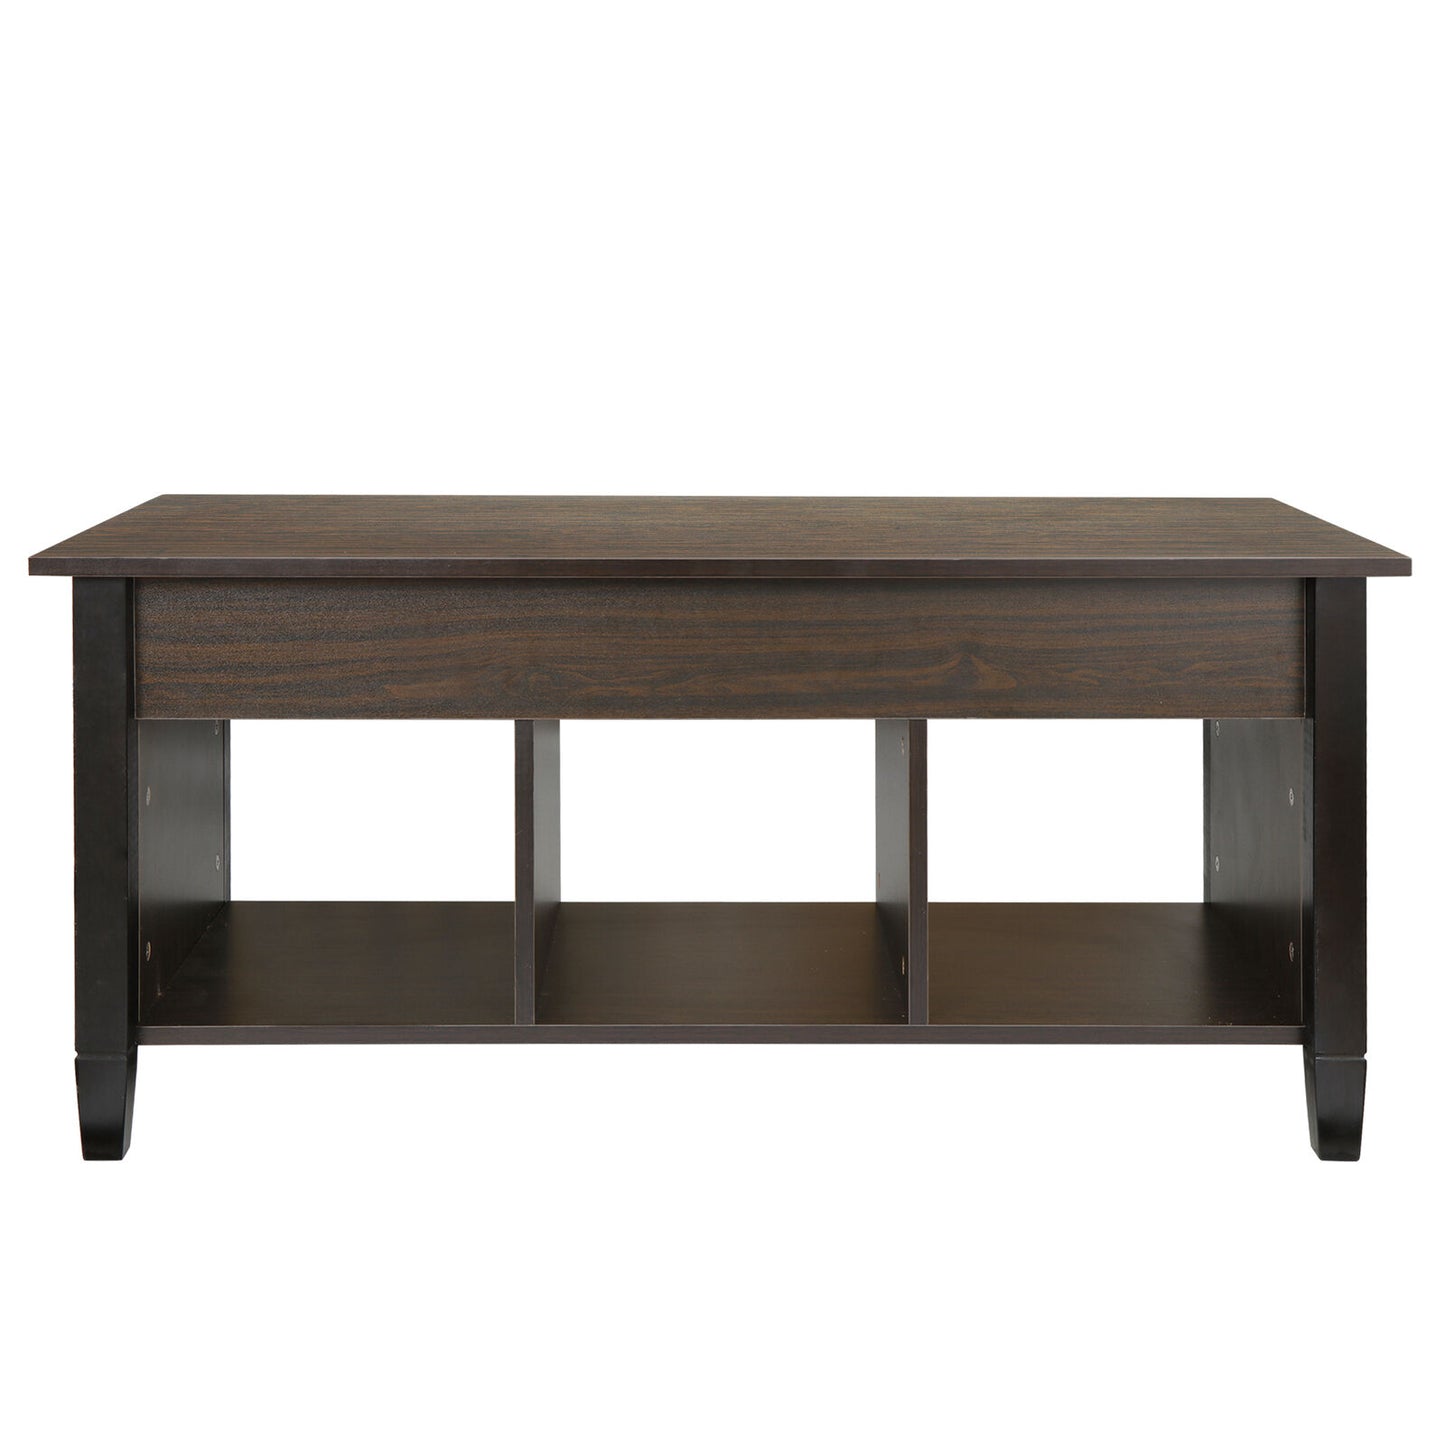 Lift Top Coffee Table with Hidden Storage Compartment Shelf for Living Room